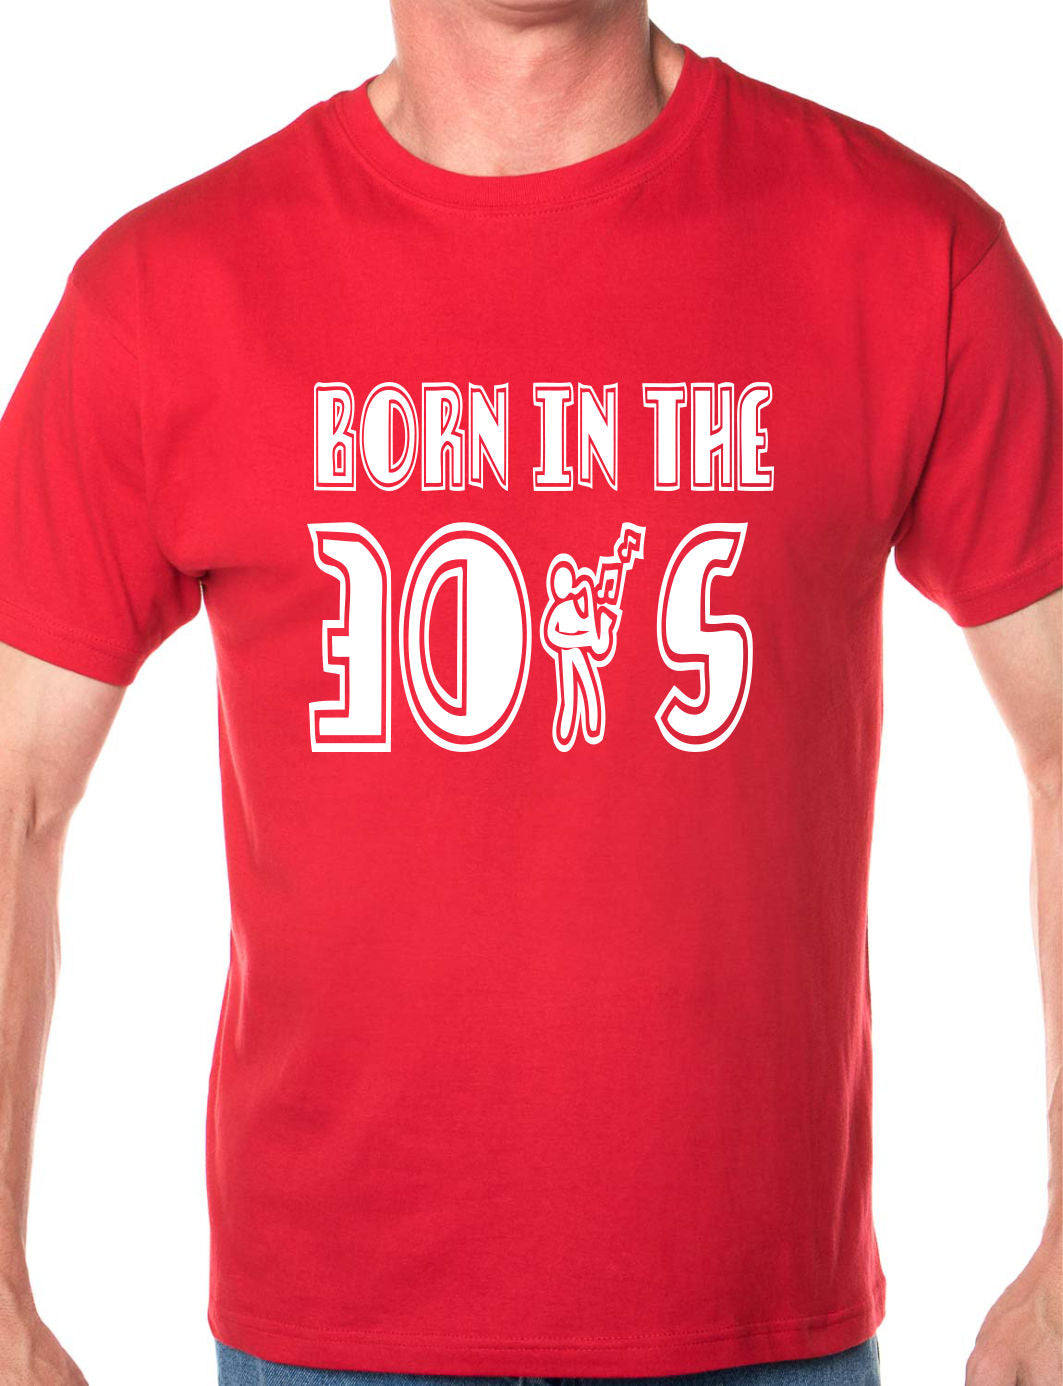 Born In The 30's Thirties Mens T-Shirt Size S-XXL